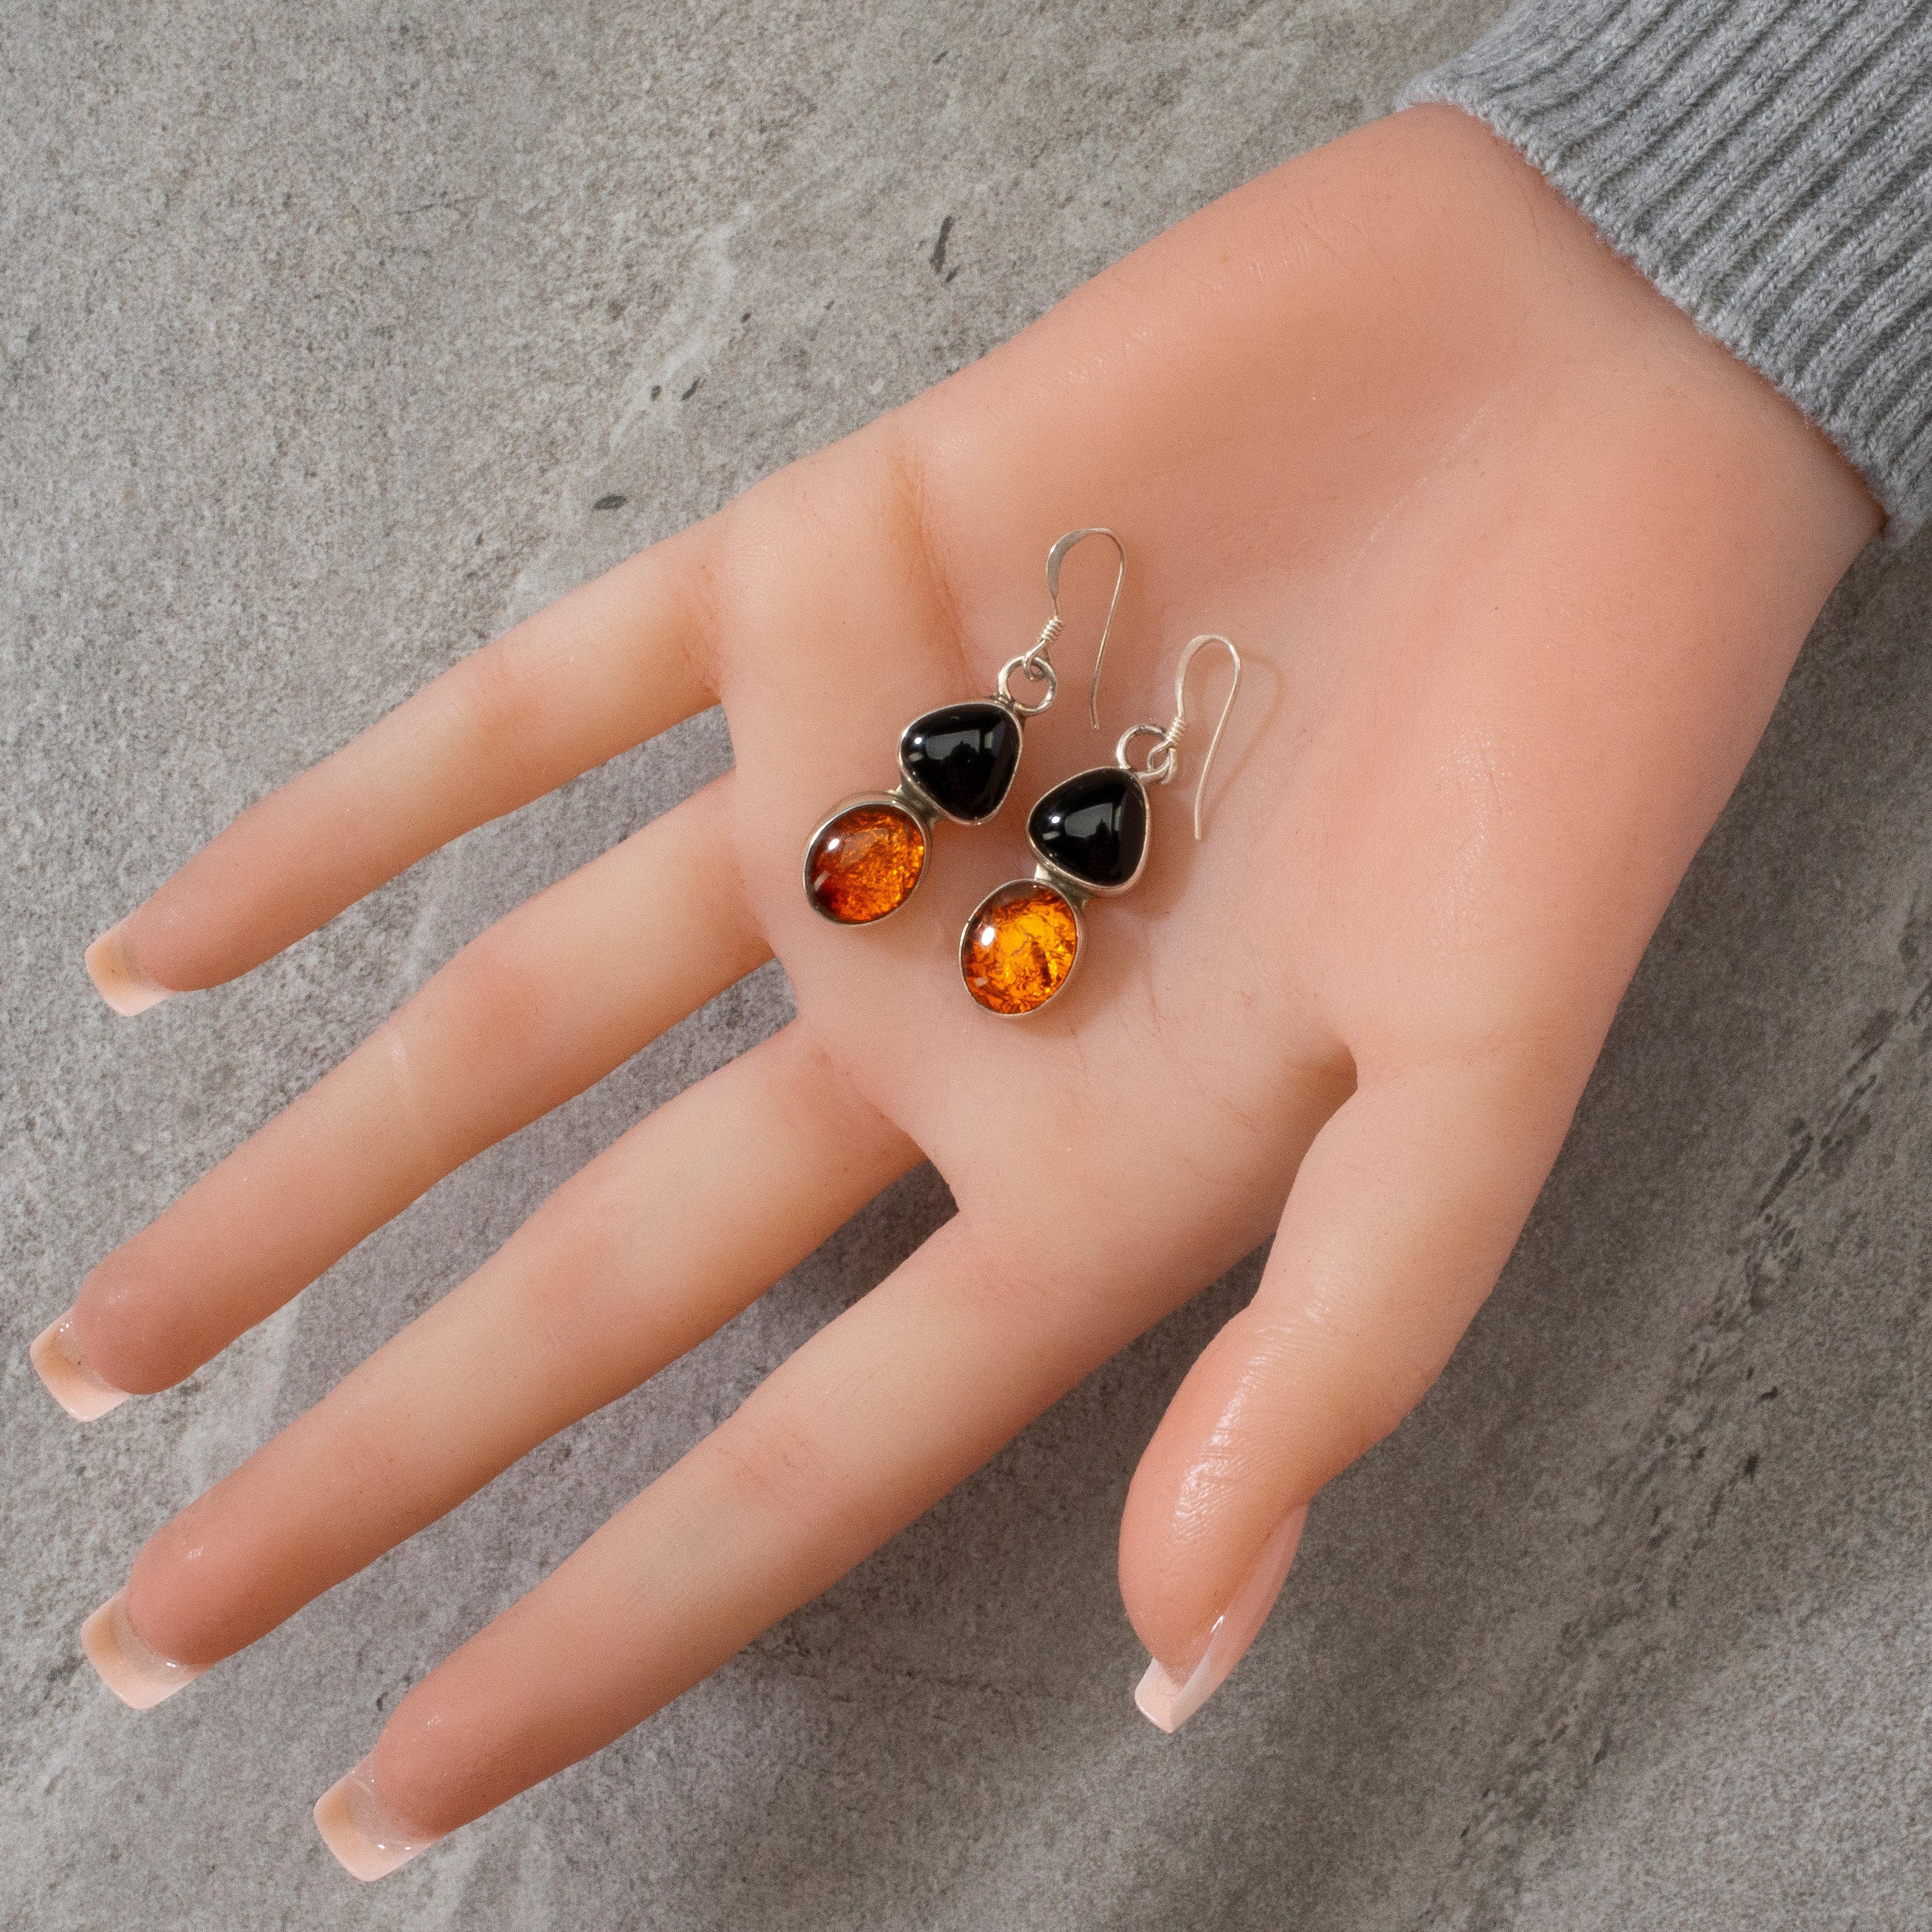 Kalifano Native American Jewelry Baltic Amber & Black Onyx Navajo USA Native American Made 925 Sterling Silver Earrings with French Hook NAE250.009